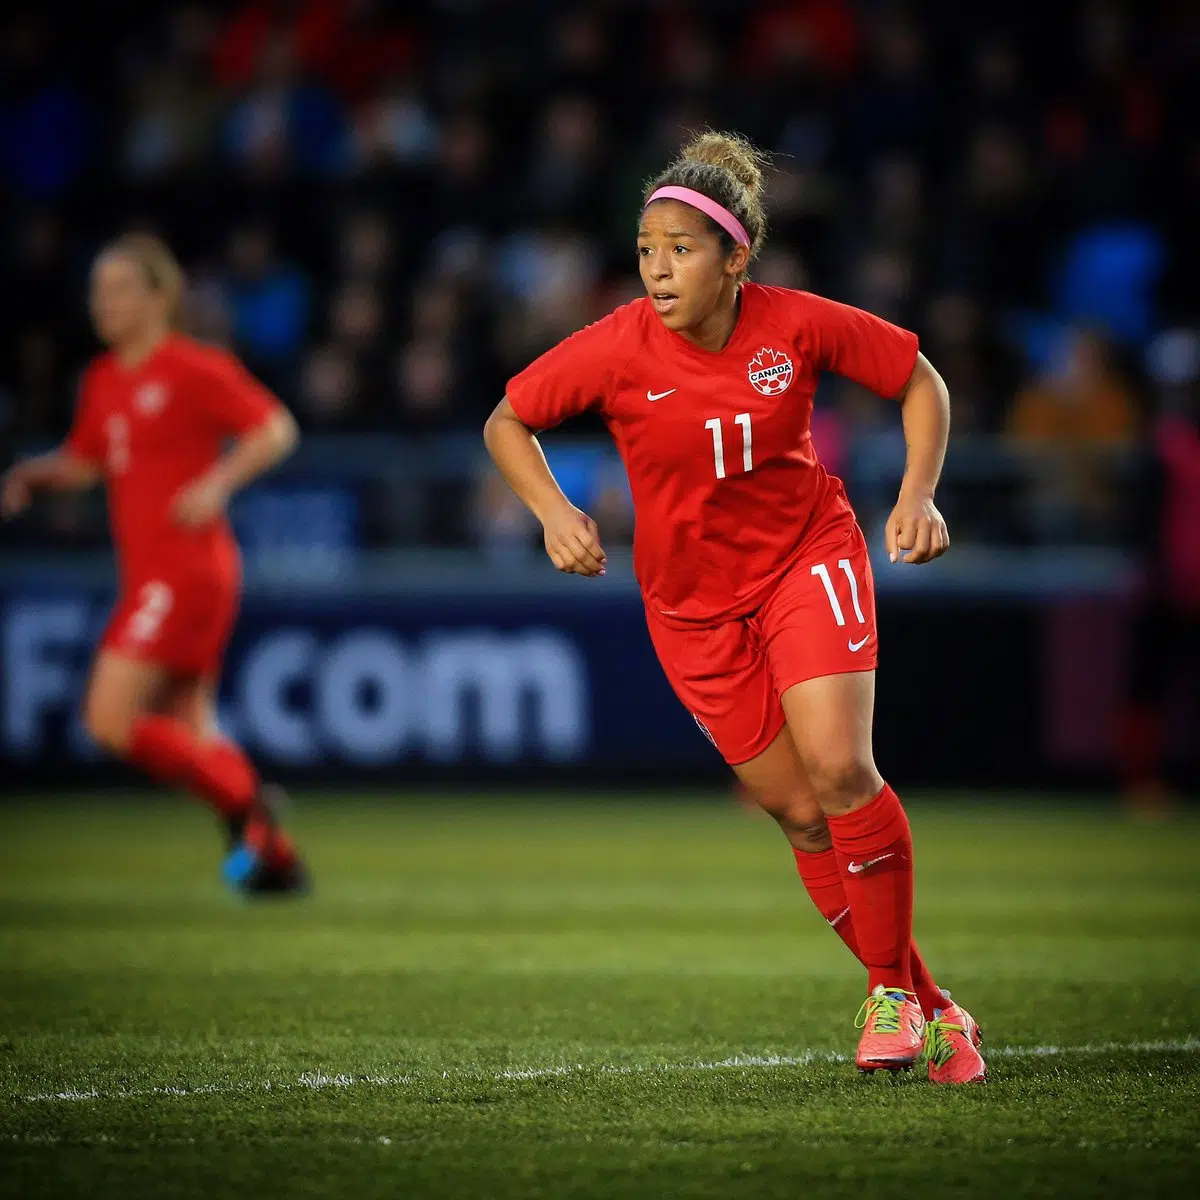 Winnipegger Desiree Scott Named to Canadian World Cup Canadian Soccer Team